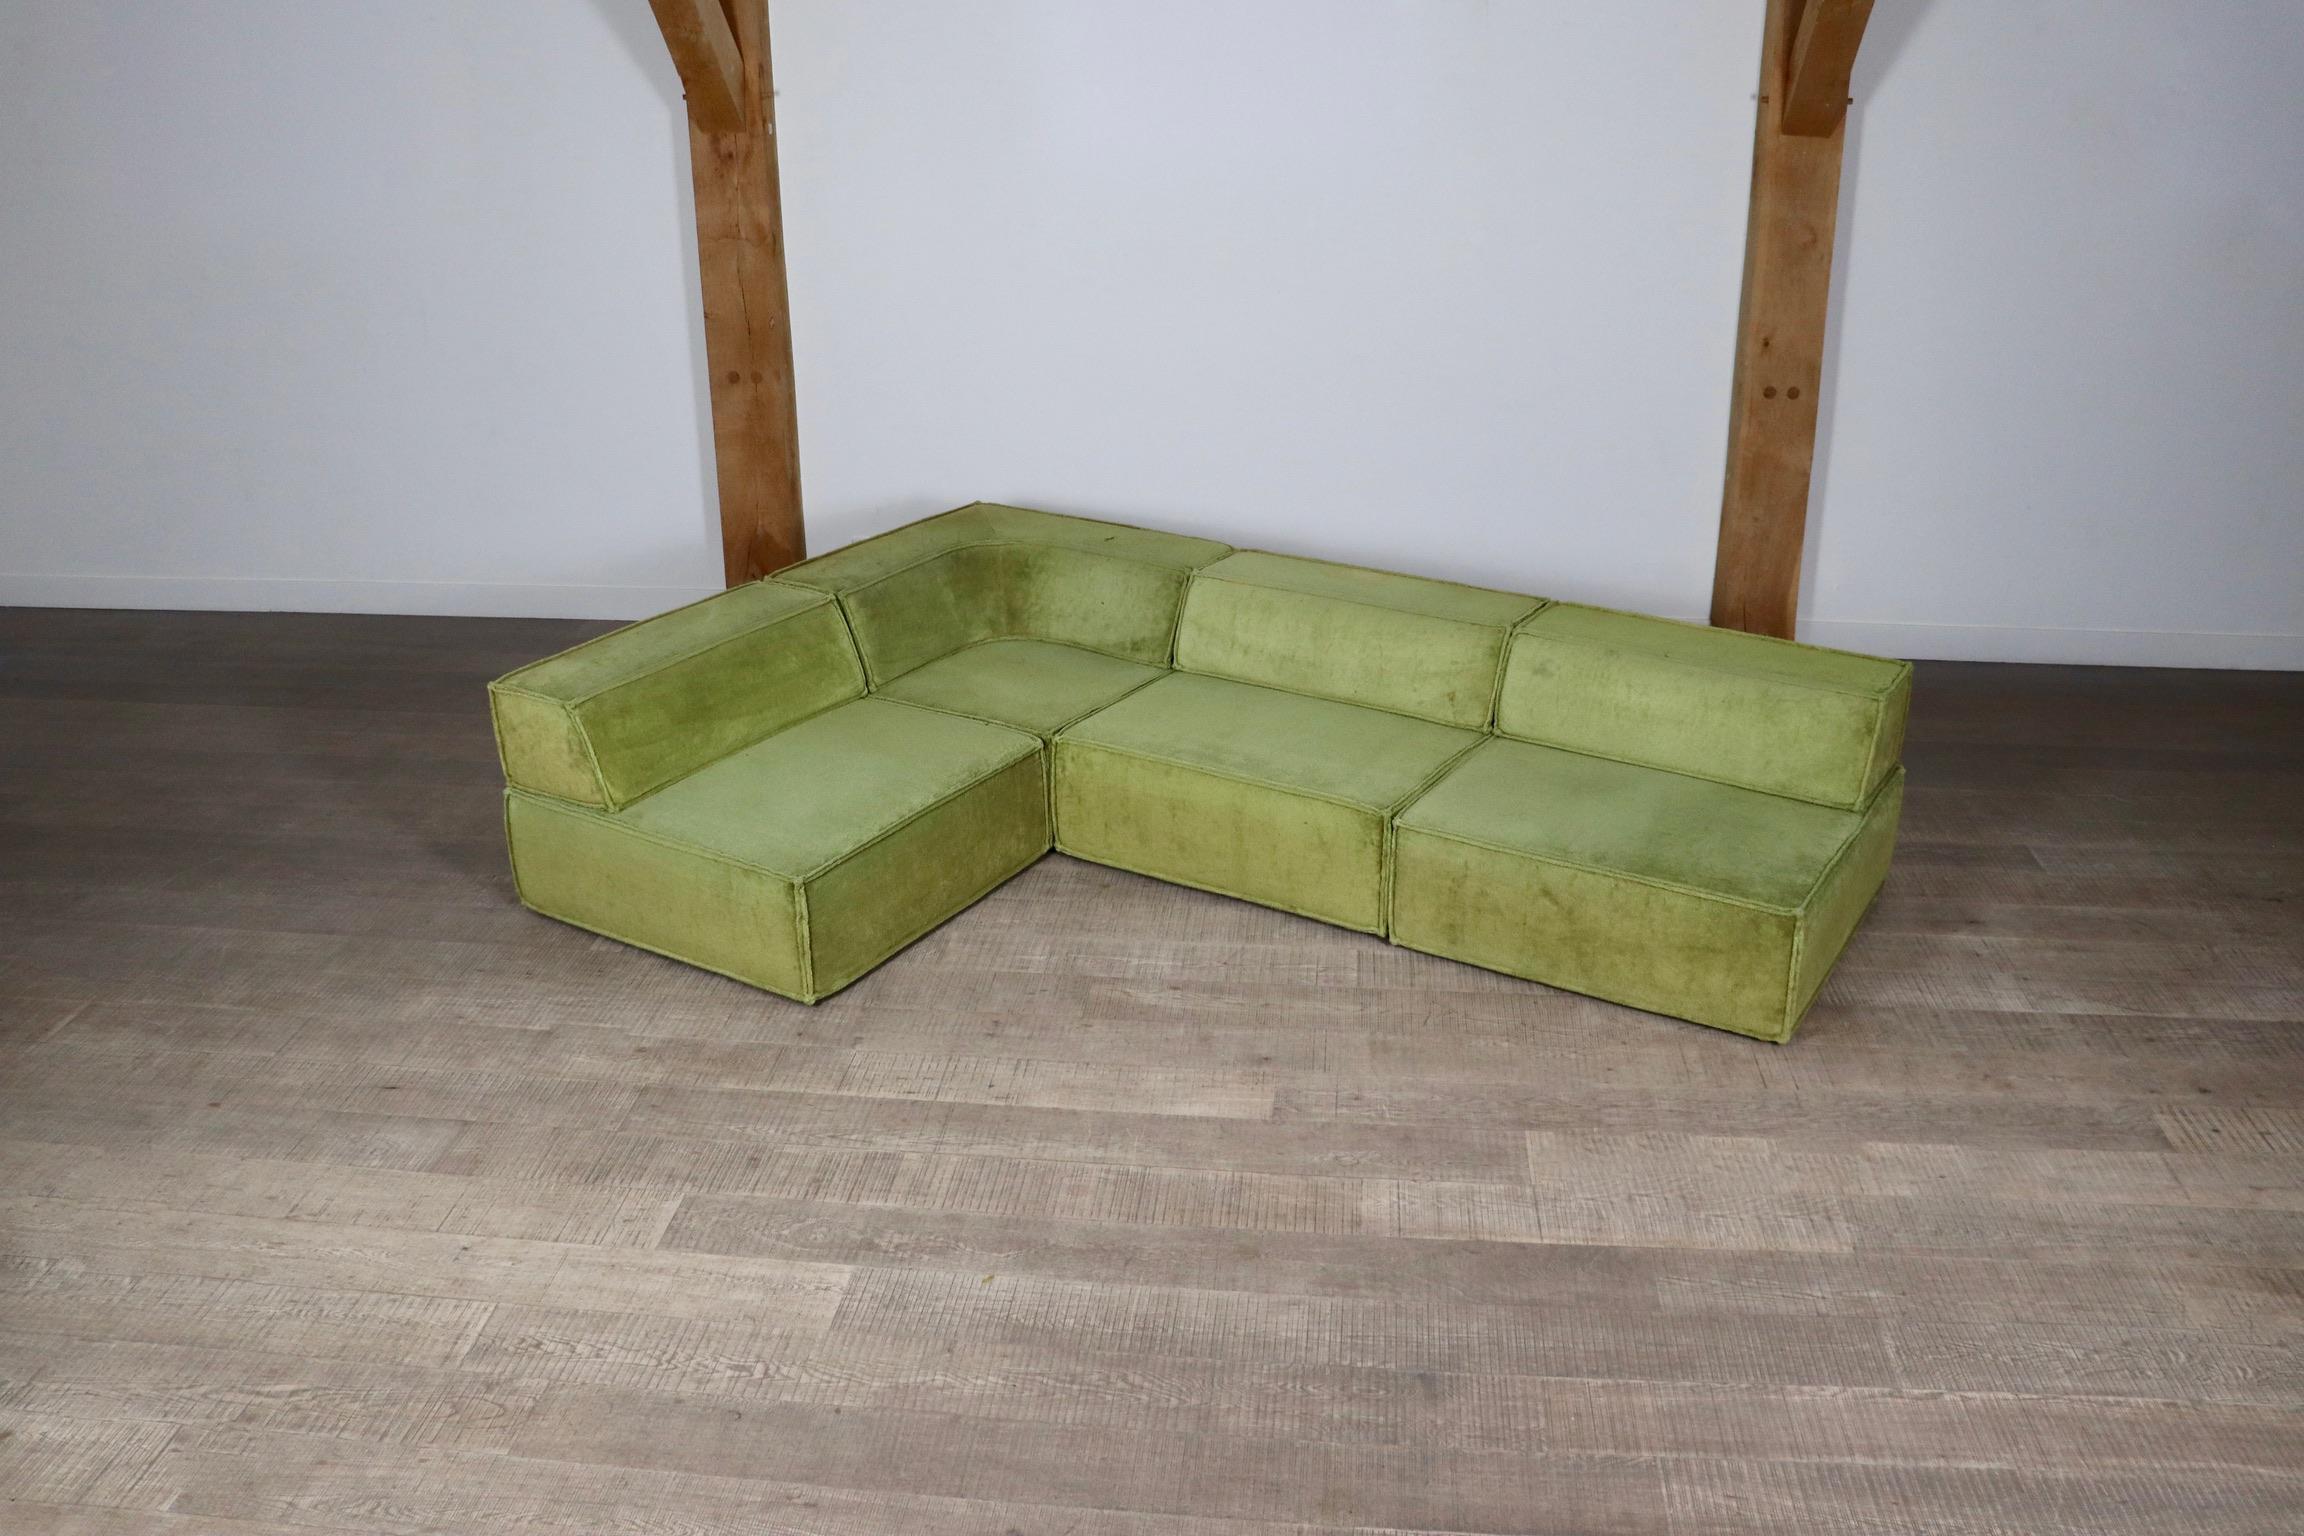 The iconic modular sofa COR trio, executed in the original green teddy fabric. The Cor Trio design was created in 1972 by Team Form AG in Switzerland for COR, and is still popular today due to its timeless design and high comfort.

This sofa